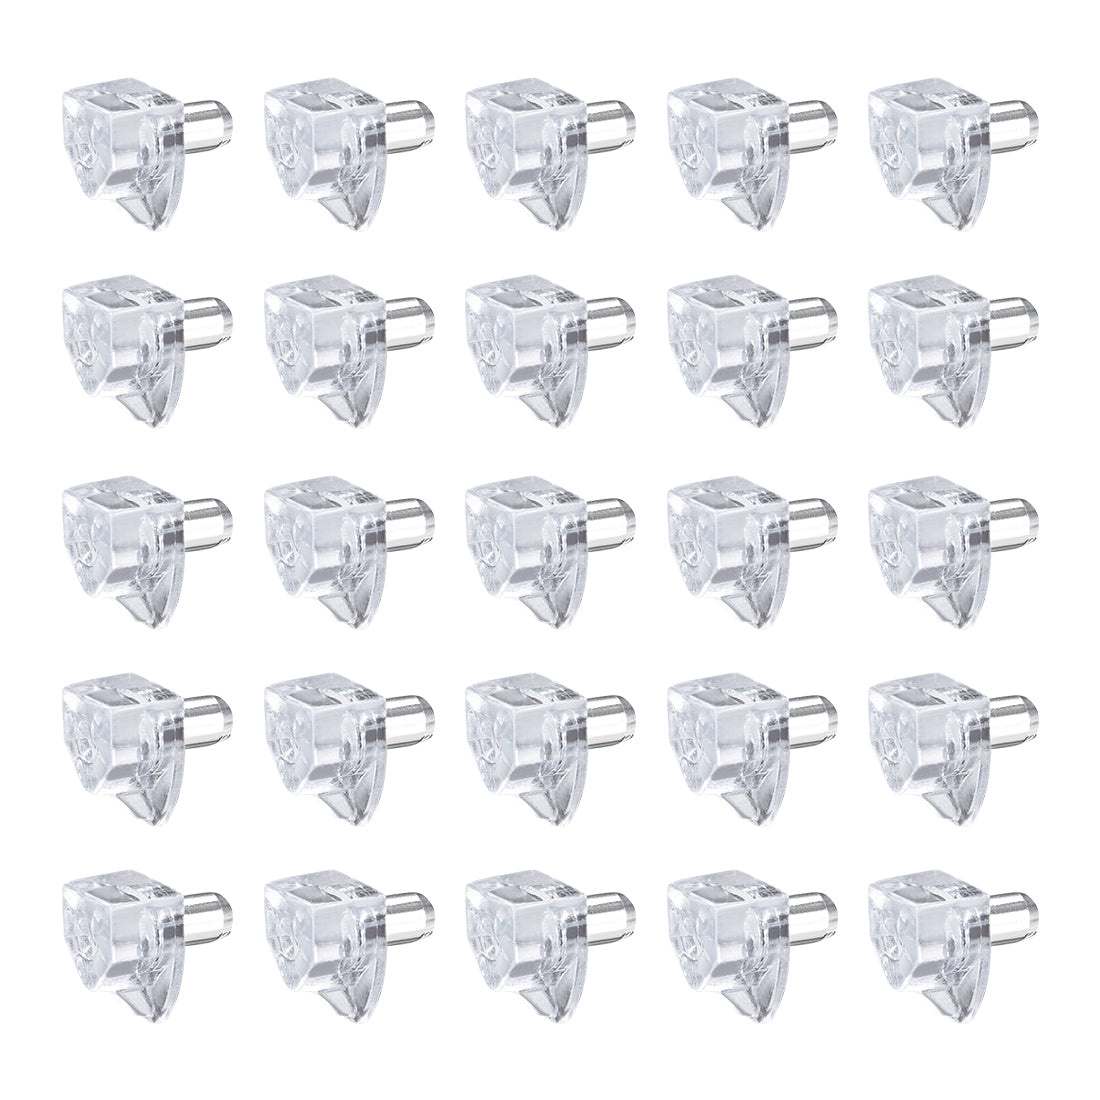 uxcell Uxcell 200pcs Plastic Shelf Support Pegs,5mm Cabinet Shelf Clips,Shelf Steel Pin Peg,Clear Bracket Style,for Kitchen Furniture Book Shelves Supplies